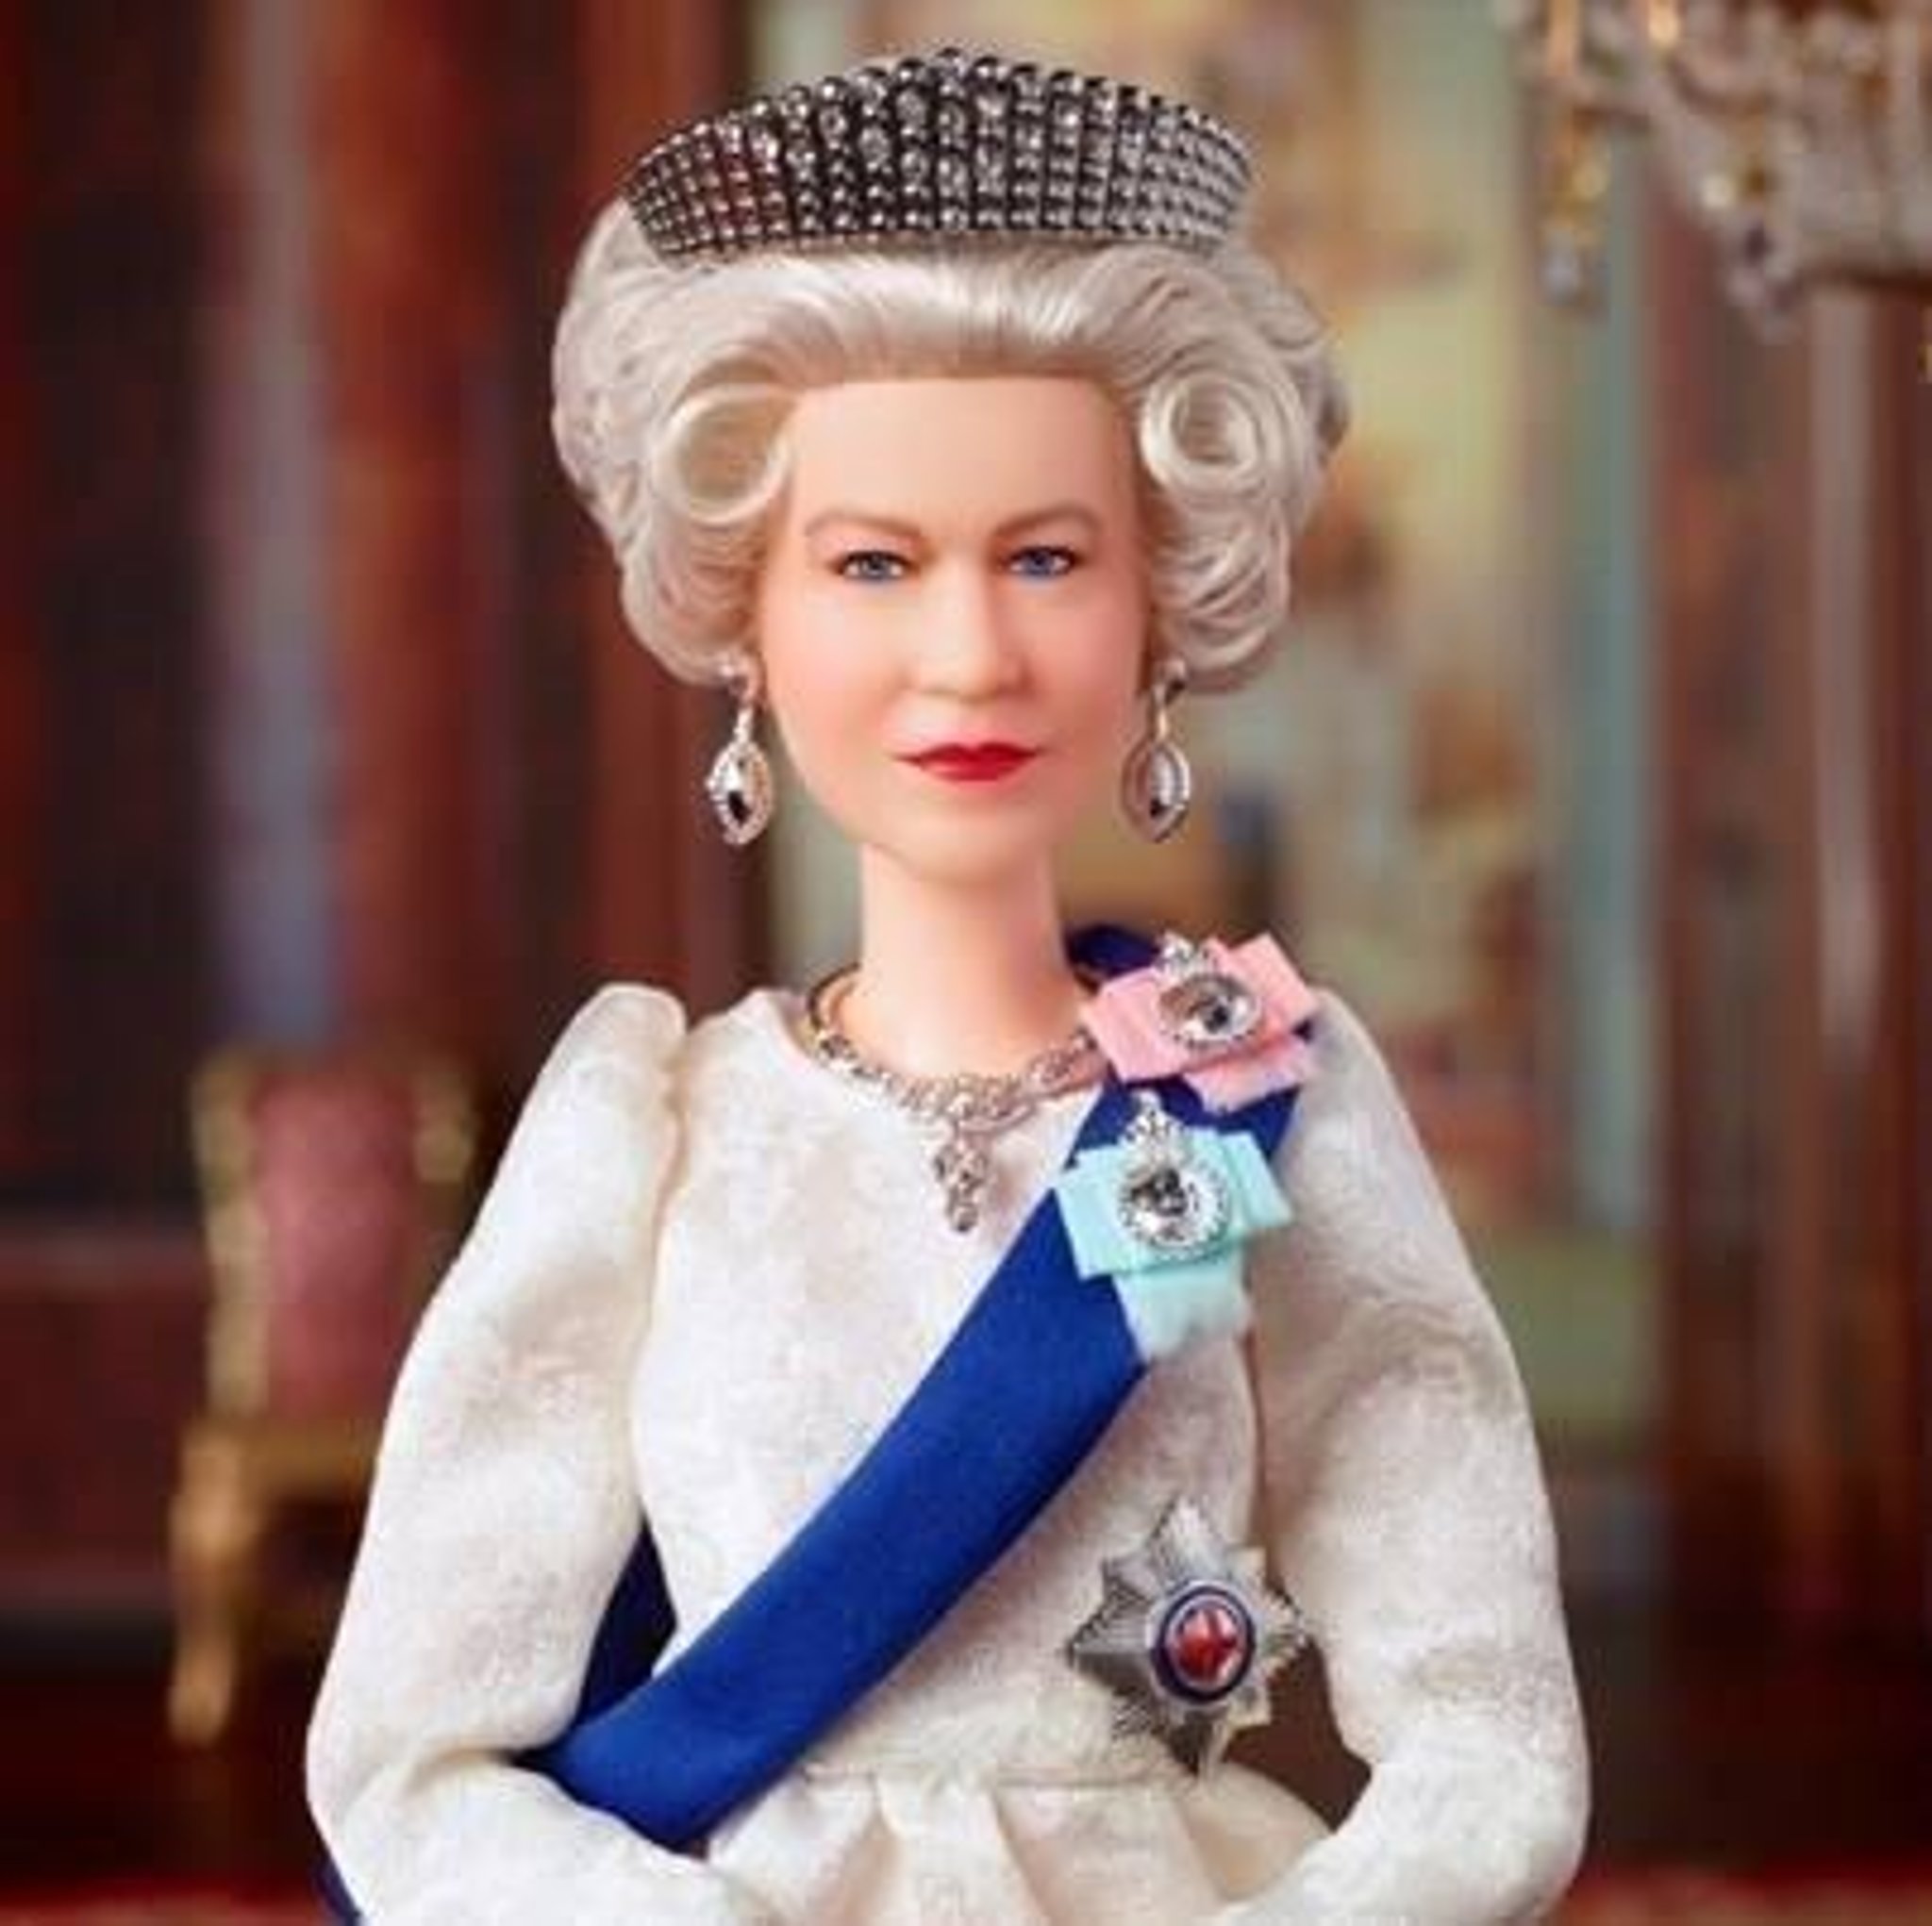 Queen Elizabeth II Barbie doll launched on monarch's 96th birthday to mark Platinum Jubilee